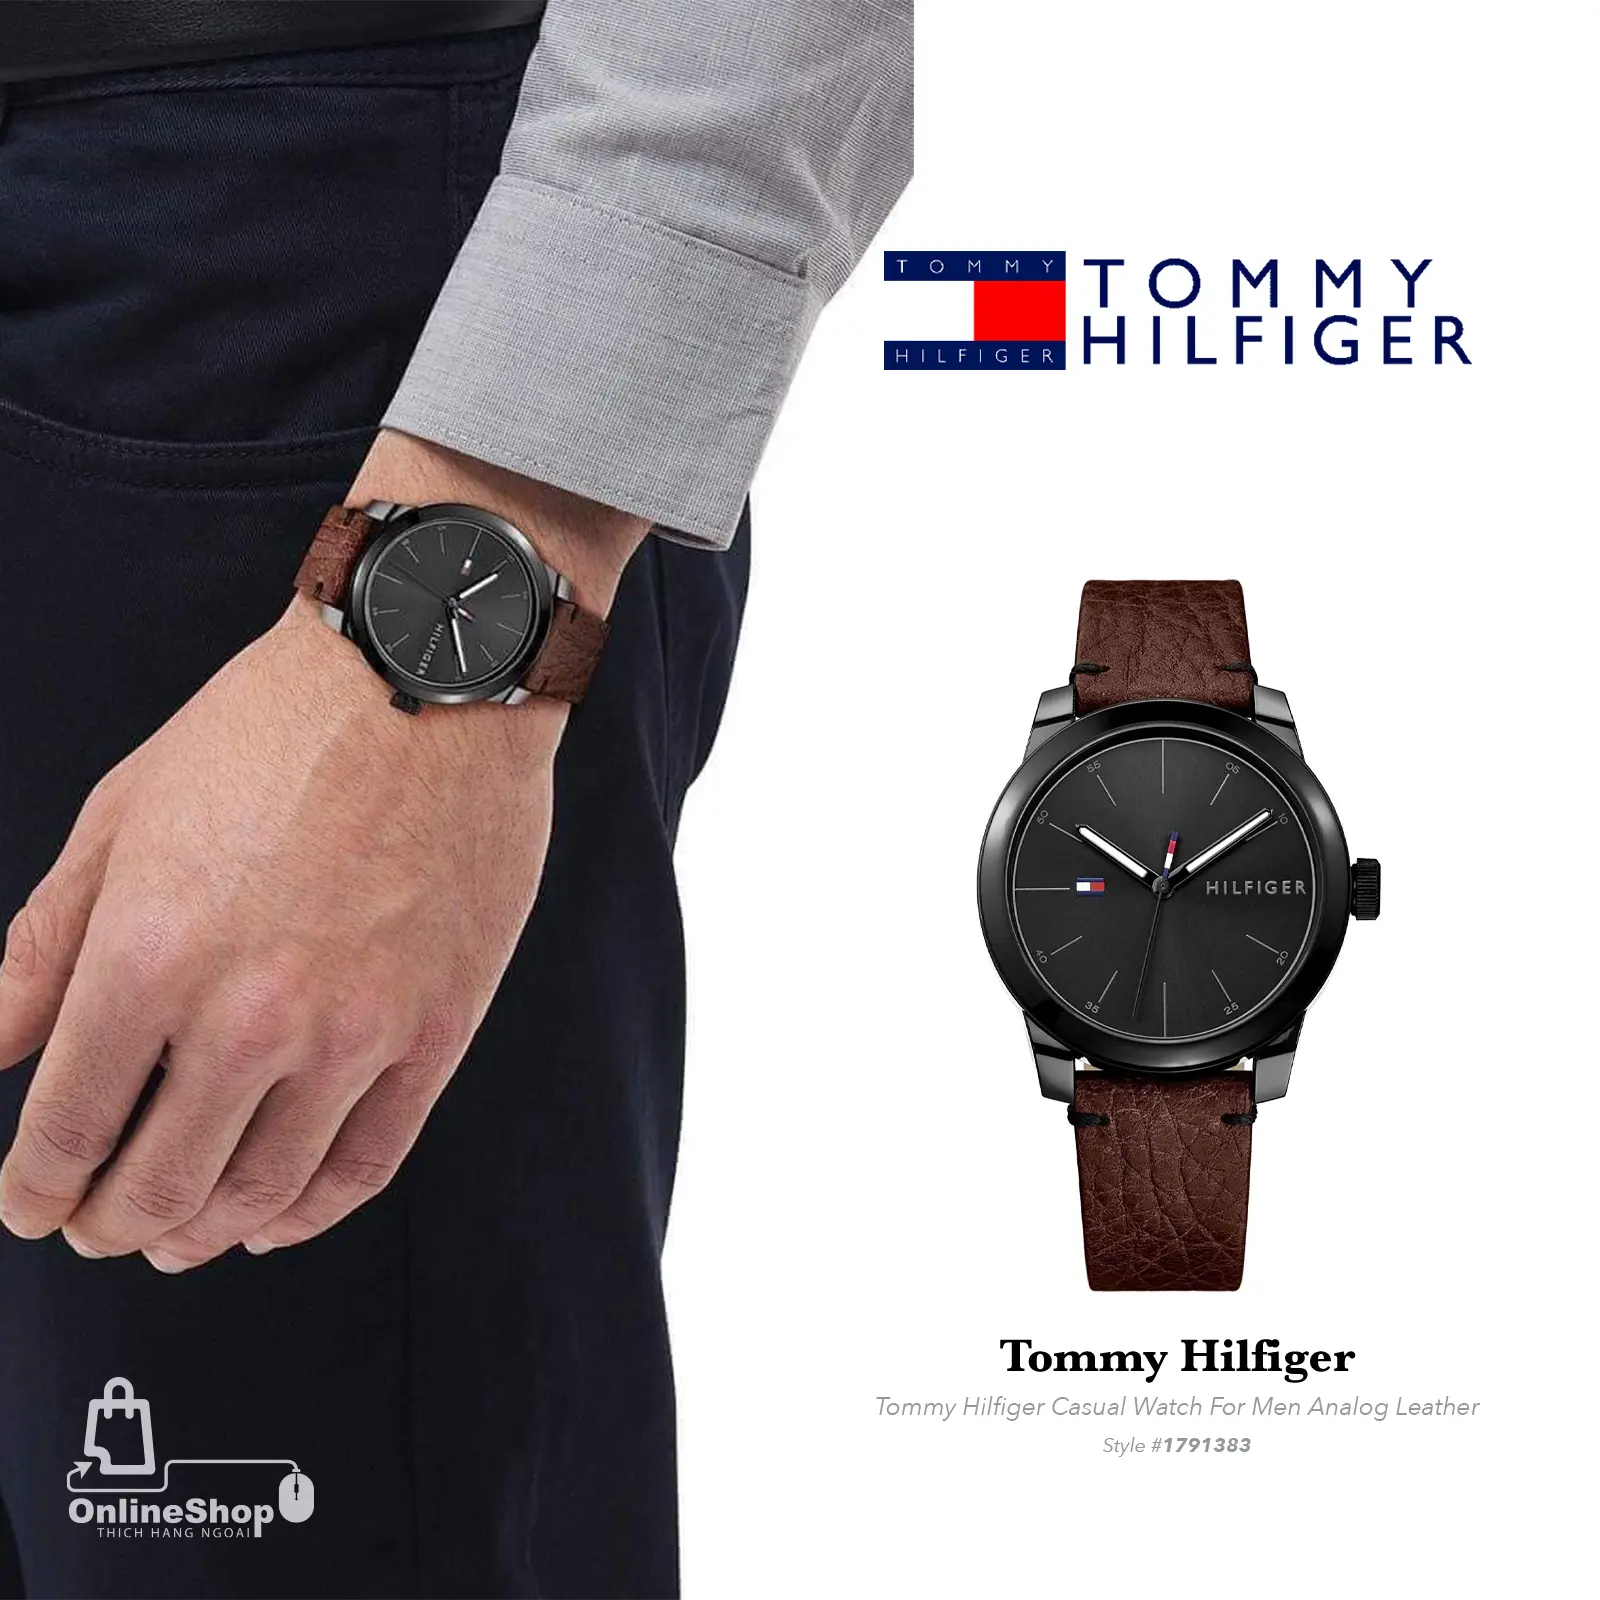 Đồng Hồ Nam Đẹp Tommy Hilfiger 1791383 Casual Watch For Men Analog Leather-hang-ngoai